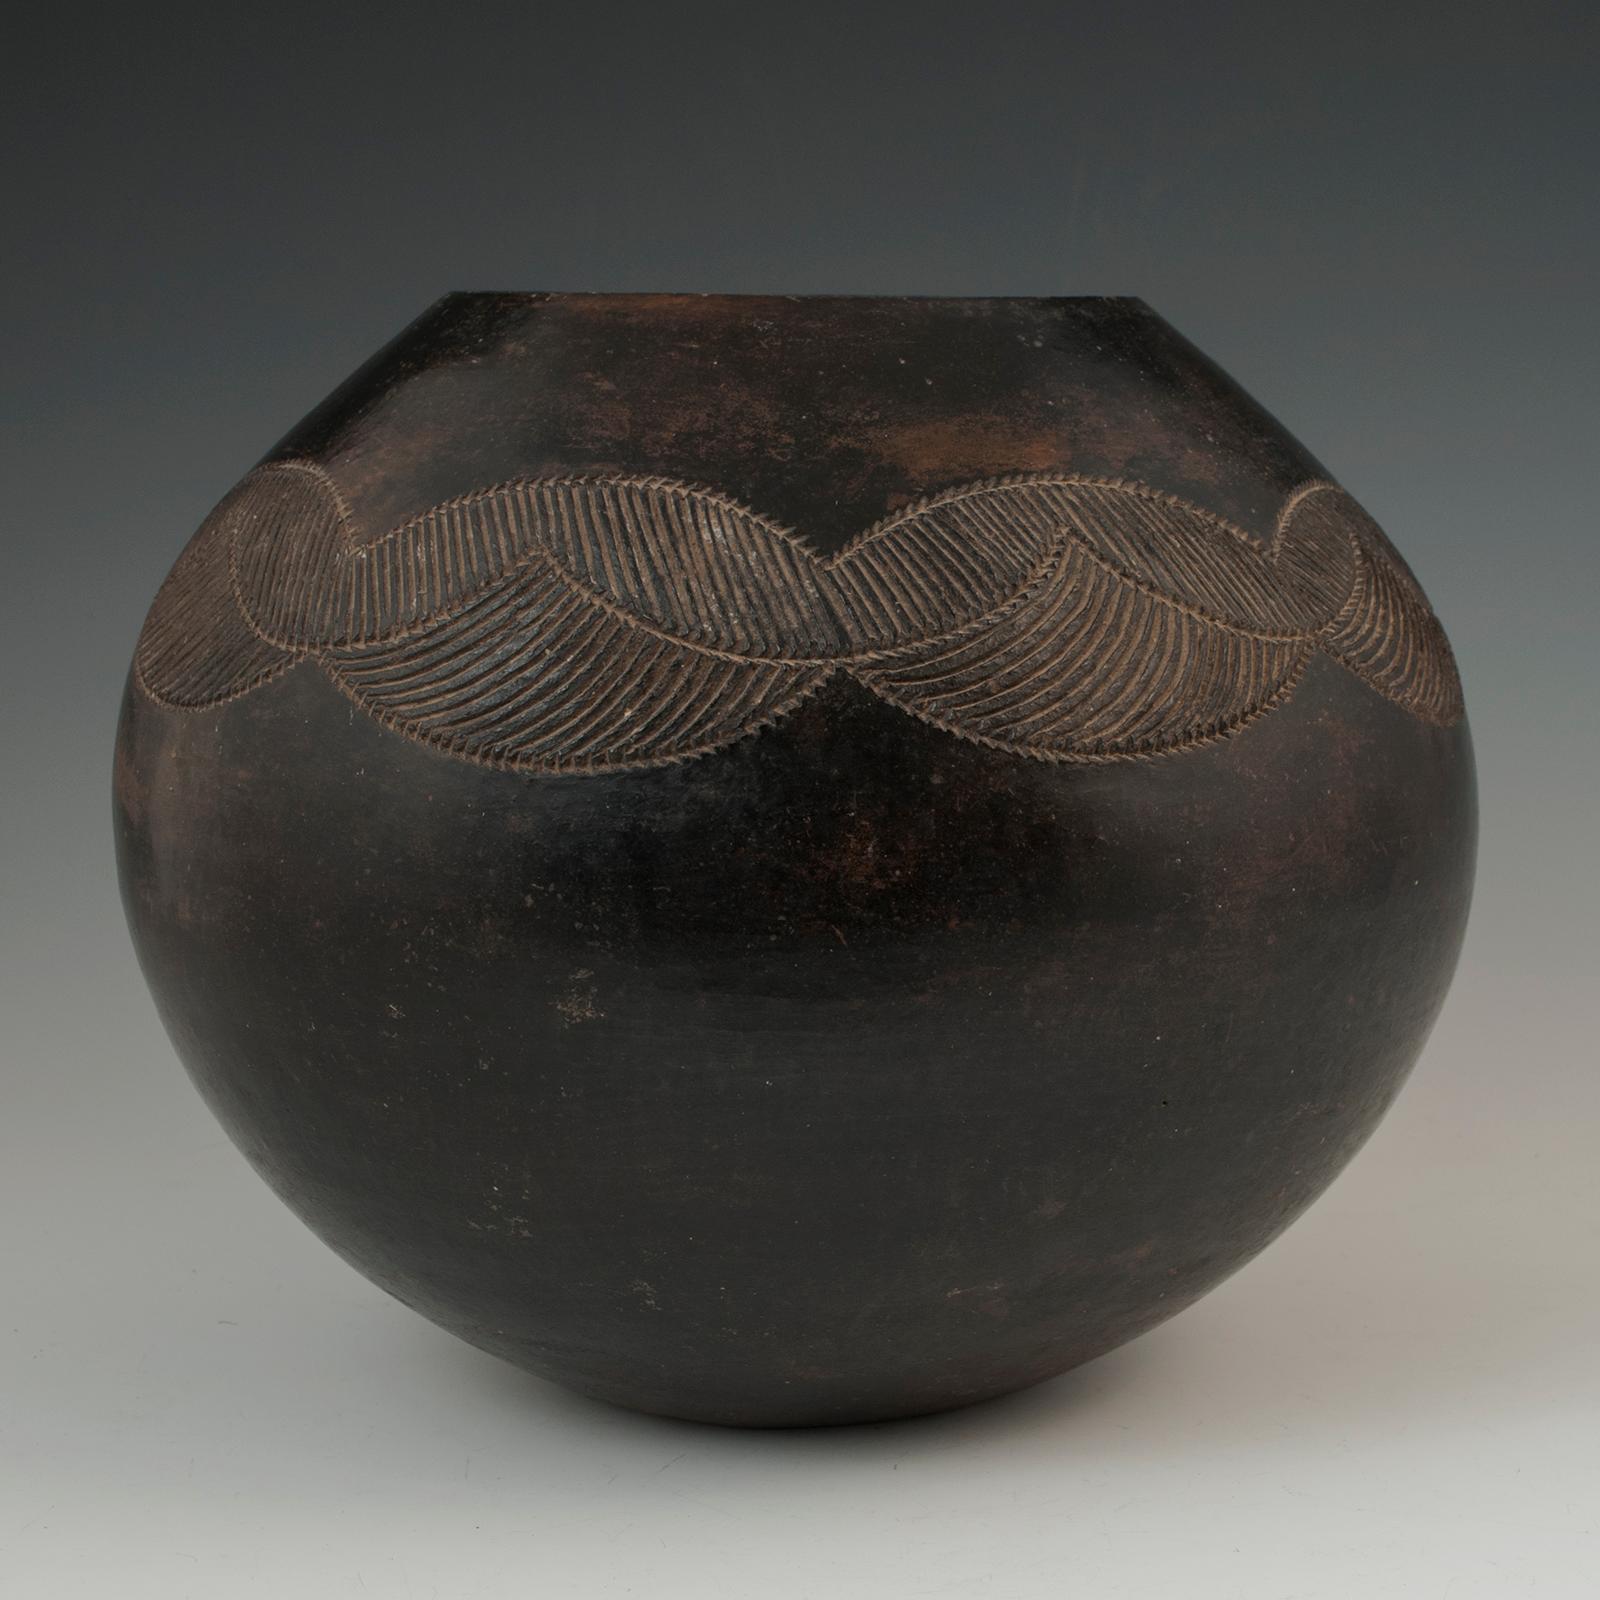 Hand-Crafted Mid-20th Century Tribal Ceramic Beer Pot, Zulu People, South Africa